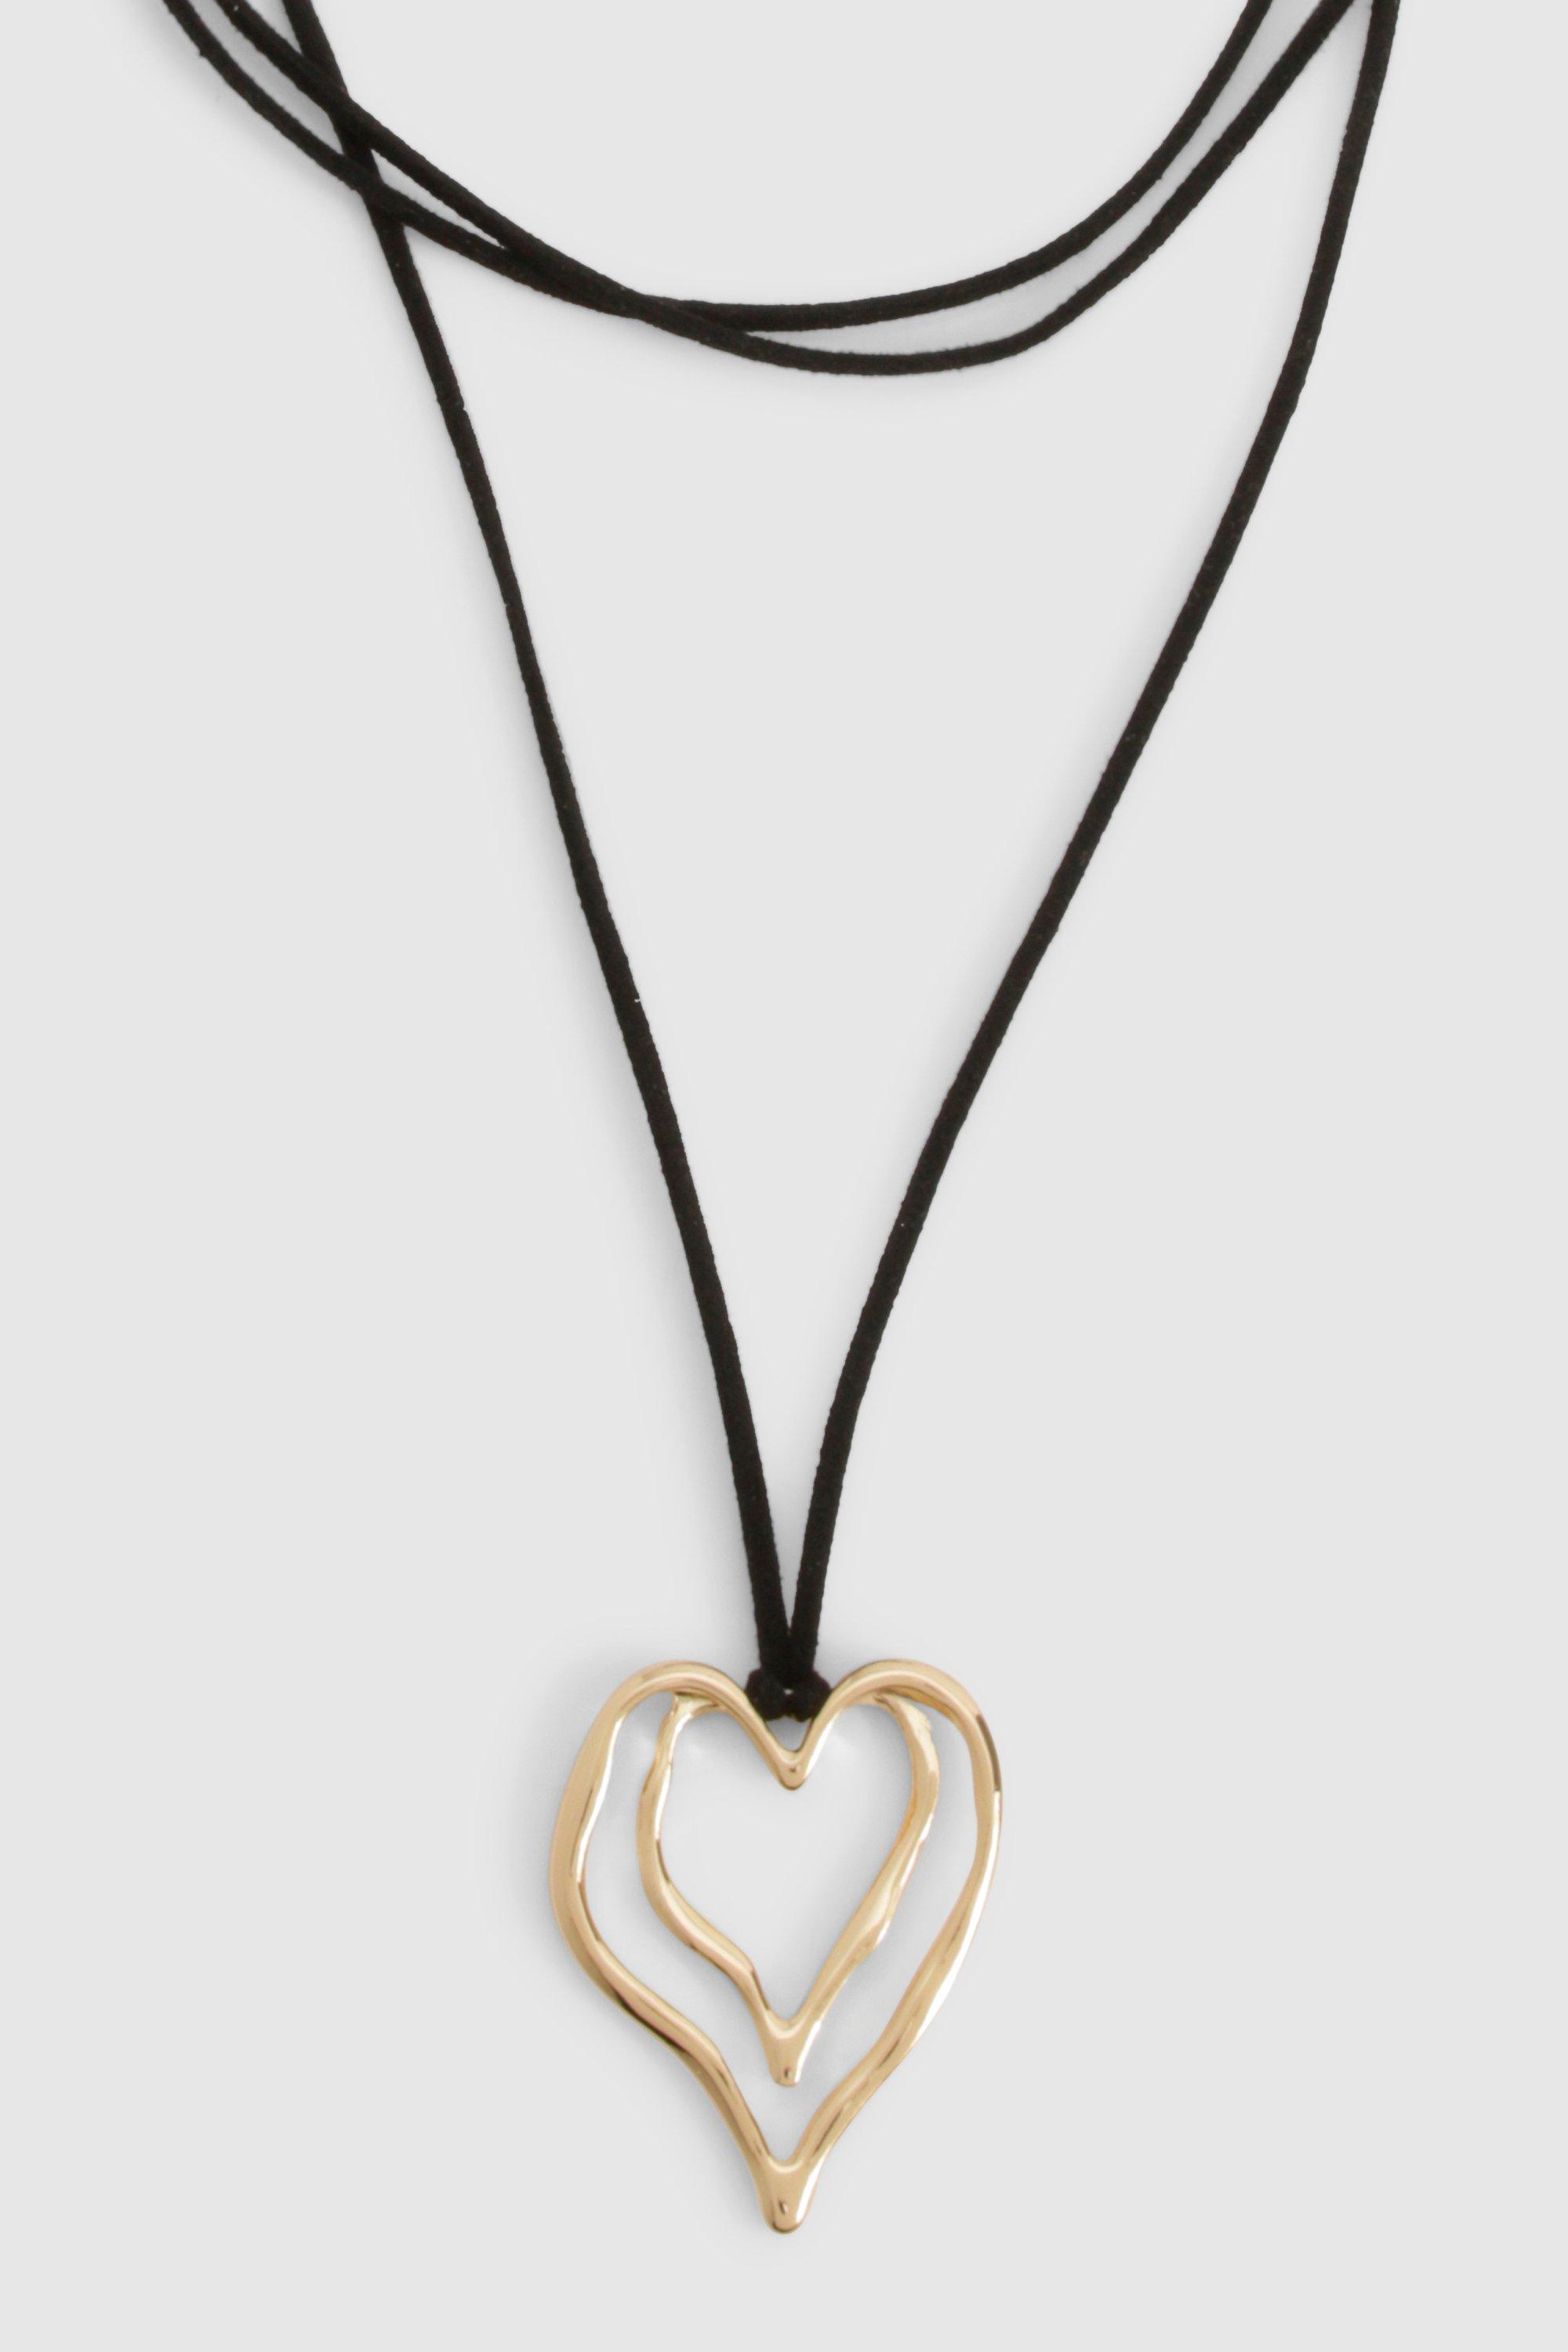 Image of Gold Abstract Heart Rope Necklace, Metallics